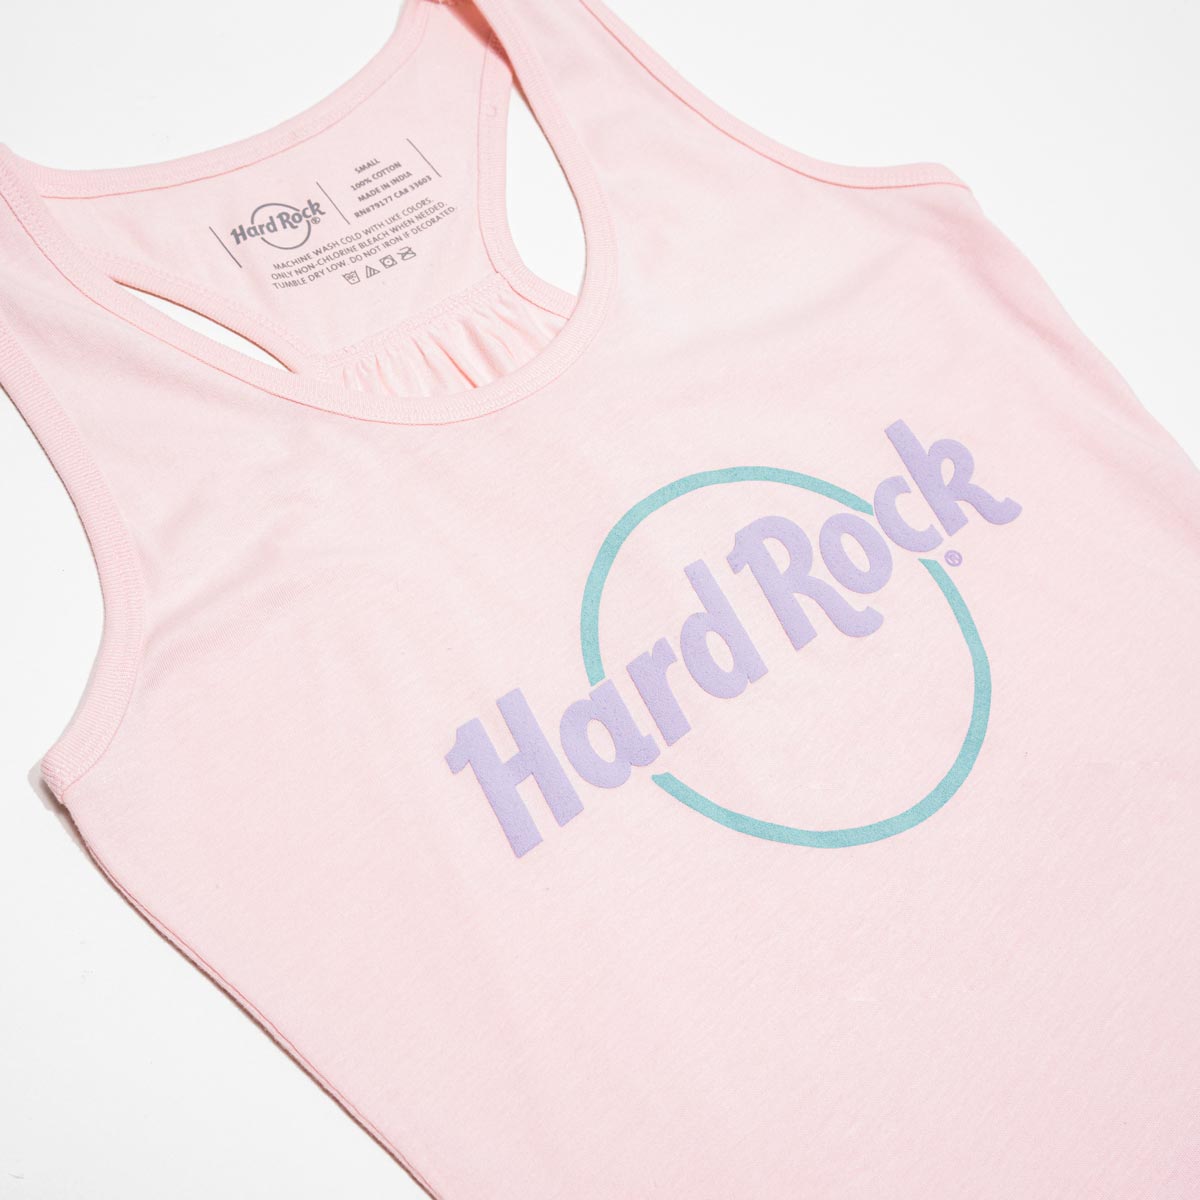 Hard Rock Women's Fit Pop of Color Tank Top in Plush Pink image number 3